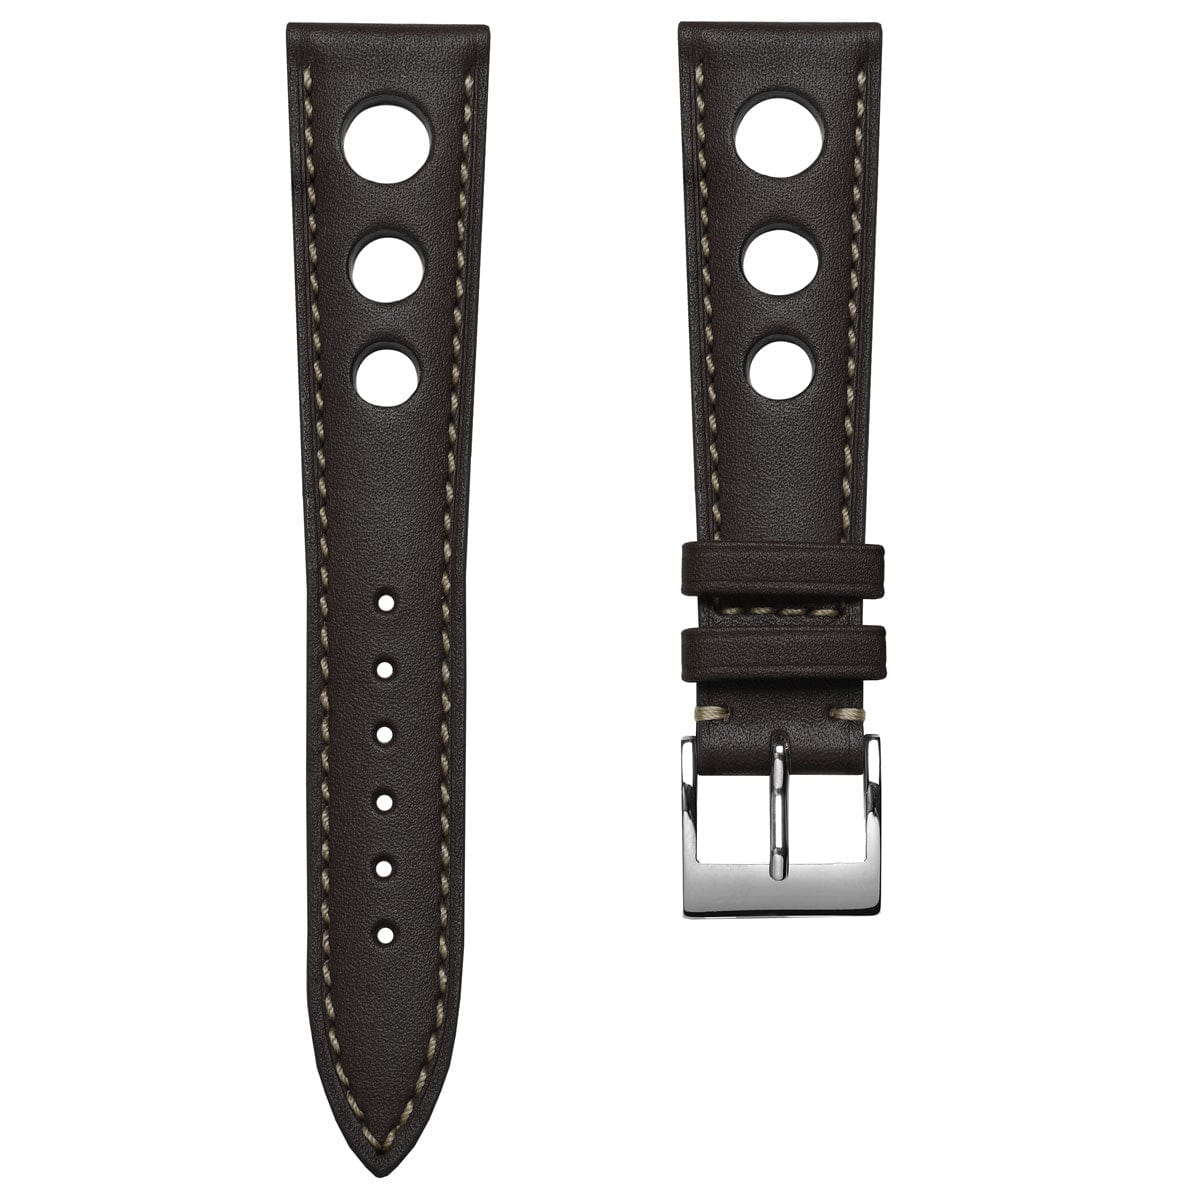 Ostend Racing Handmade Tannerie Degermann Leather Watch Strap - Chocolate Brown